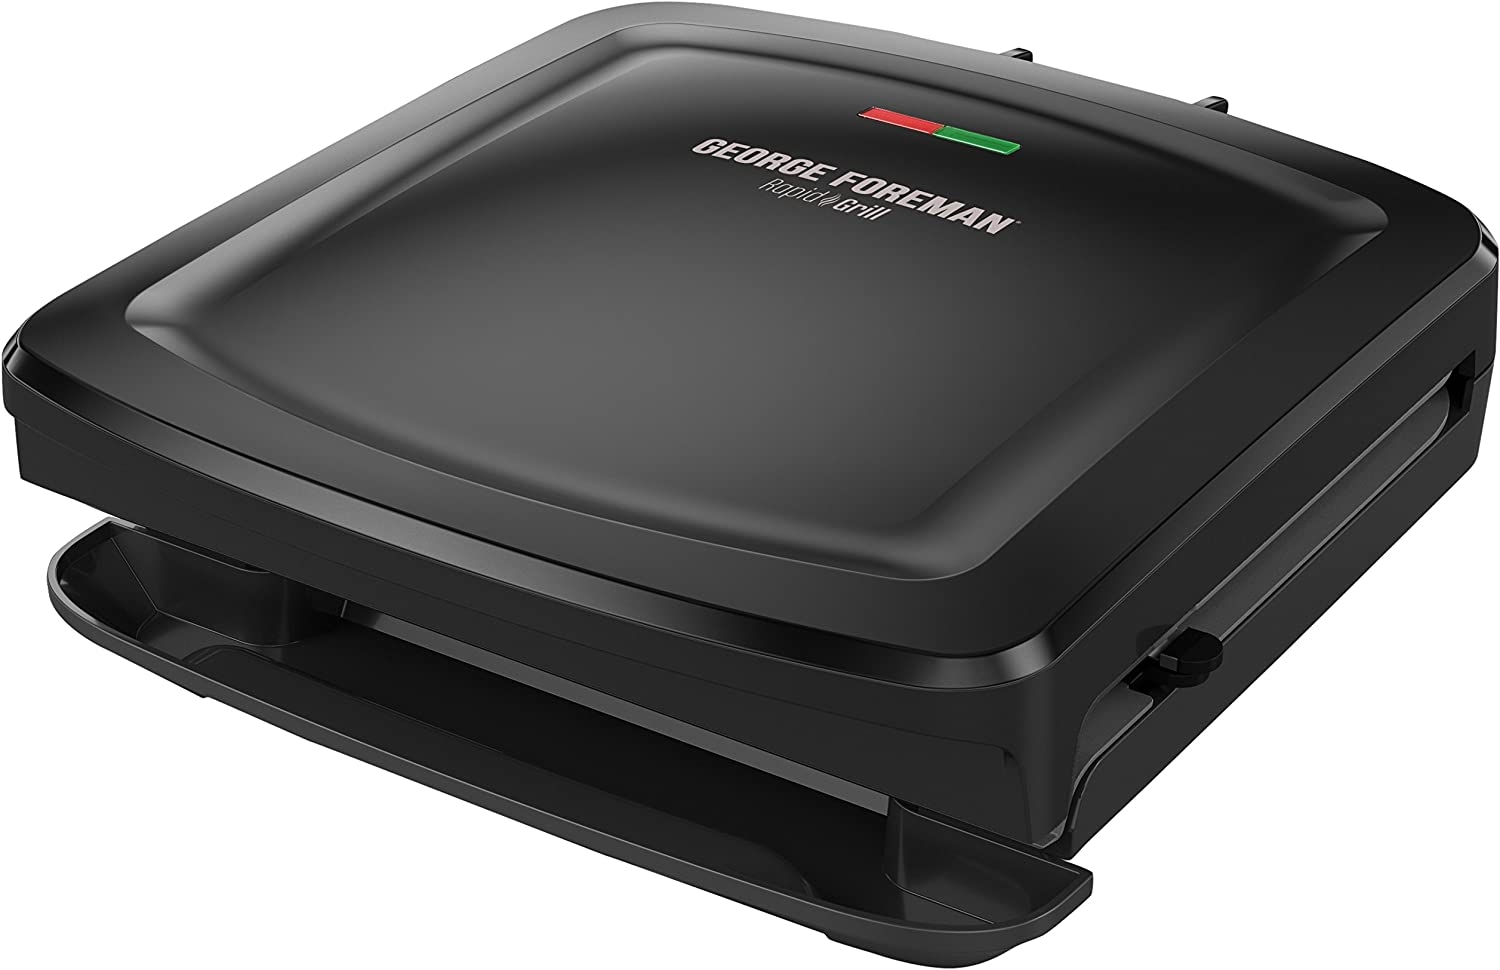 George Foreman Rapid Grill Series, 5-Serving Removable Plate Electric Indoor Grill and Panini Press, Black, RPGV3801BK Import To